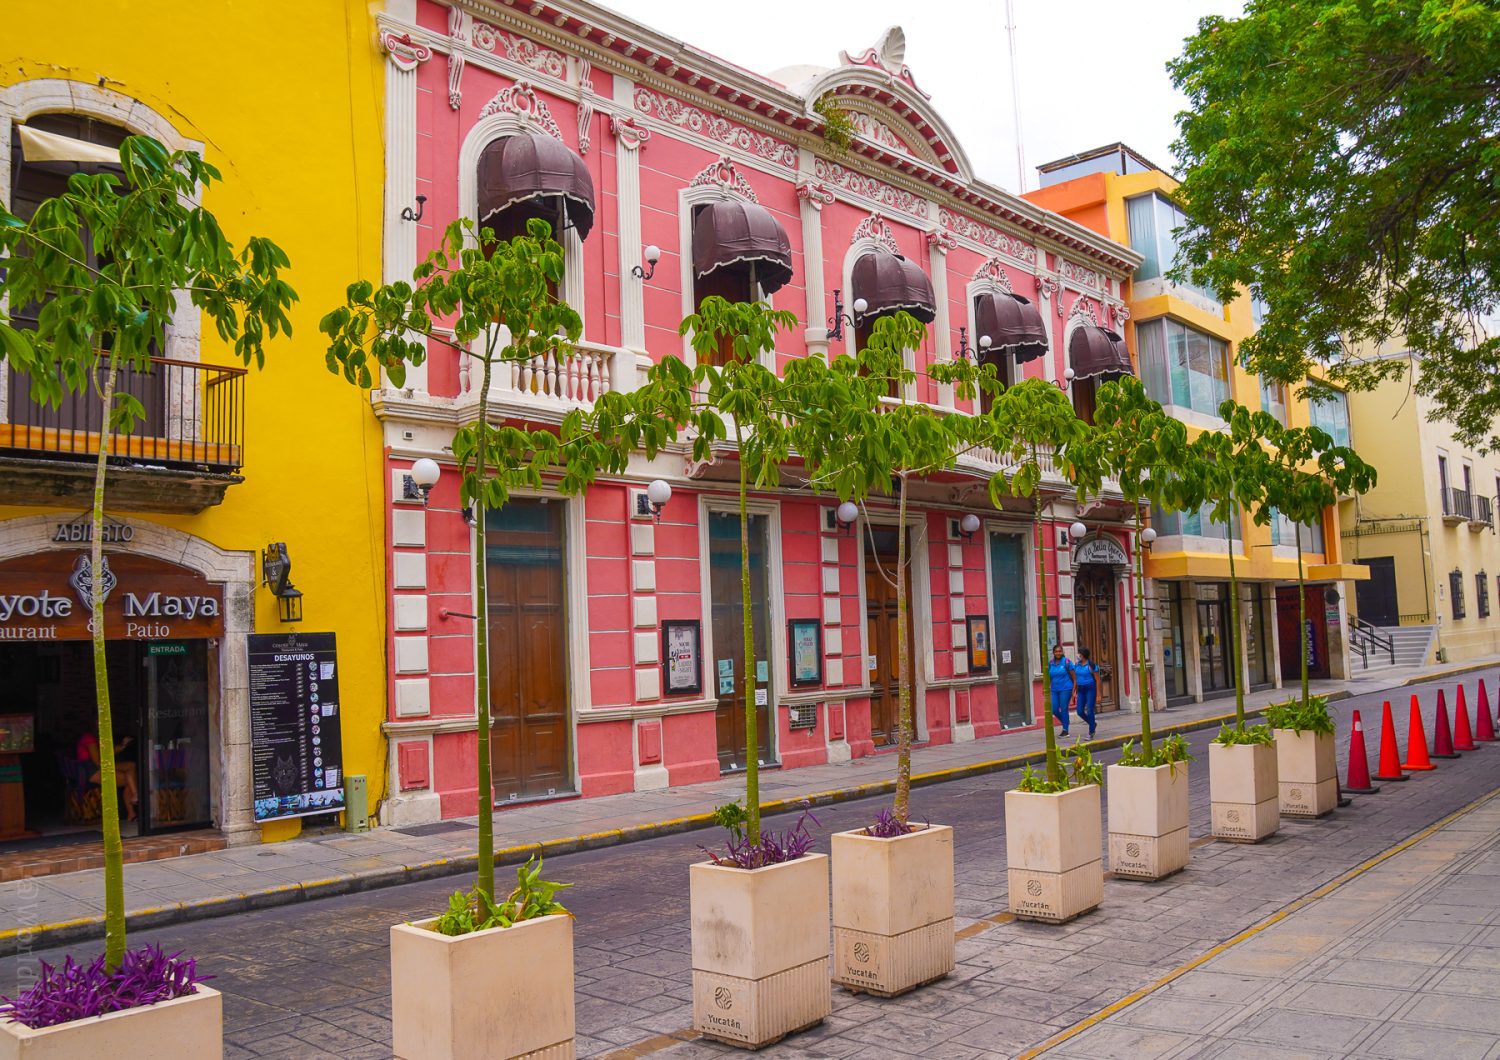 A pink building in Merida's Centro.